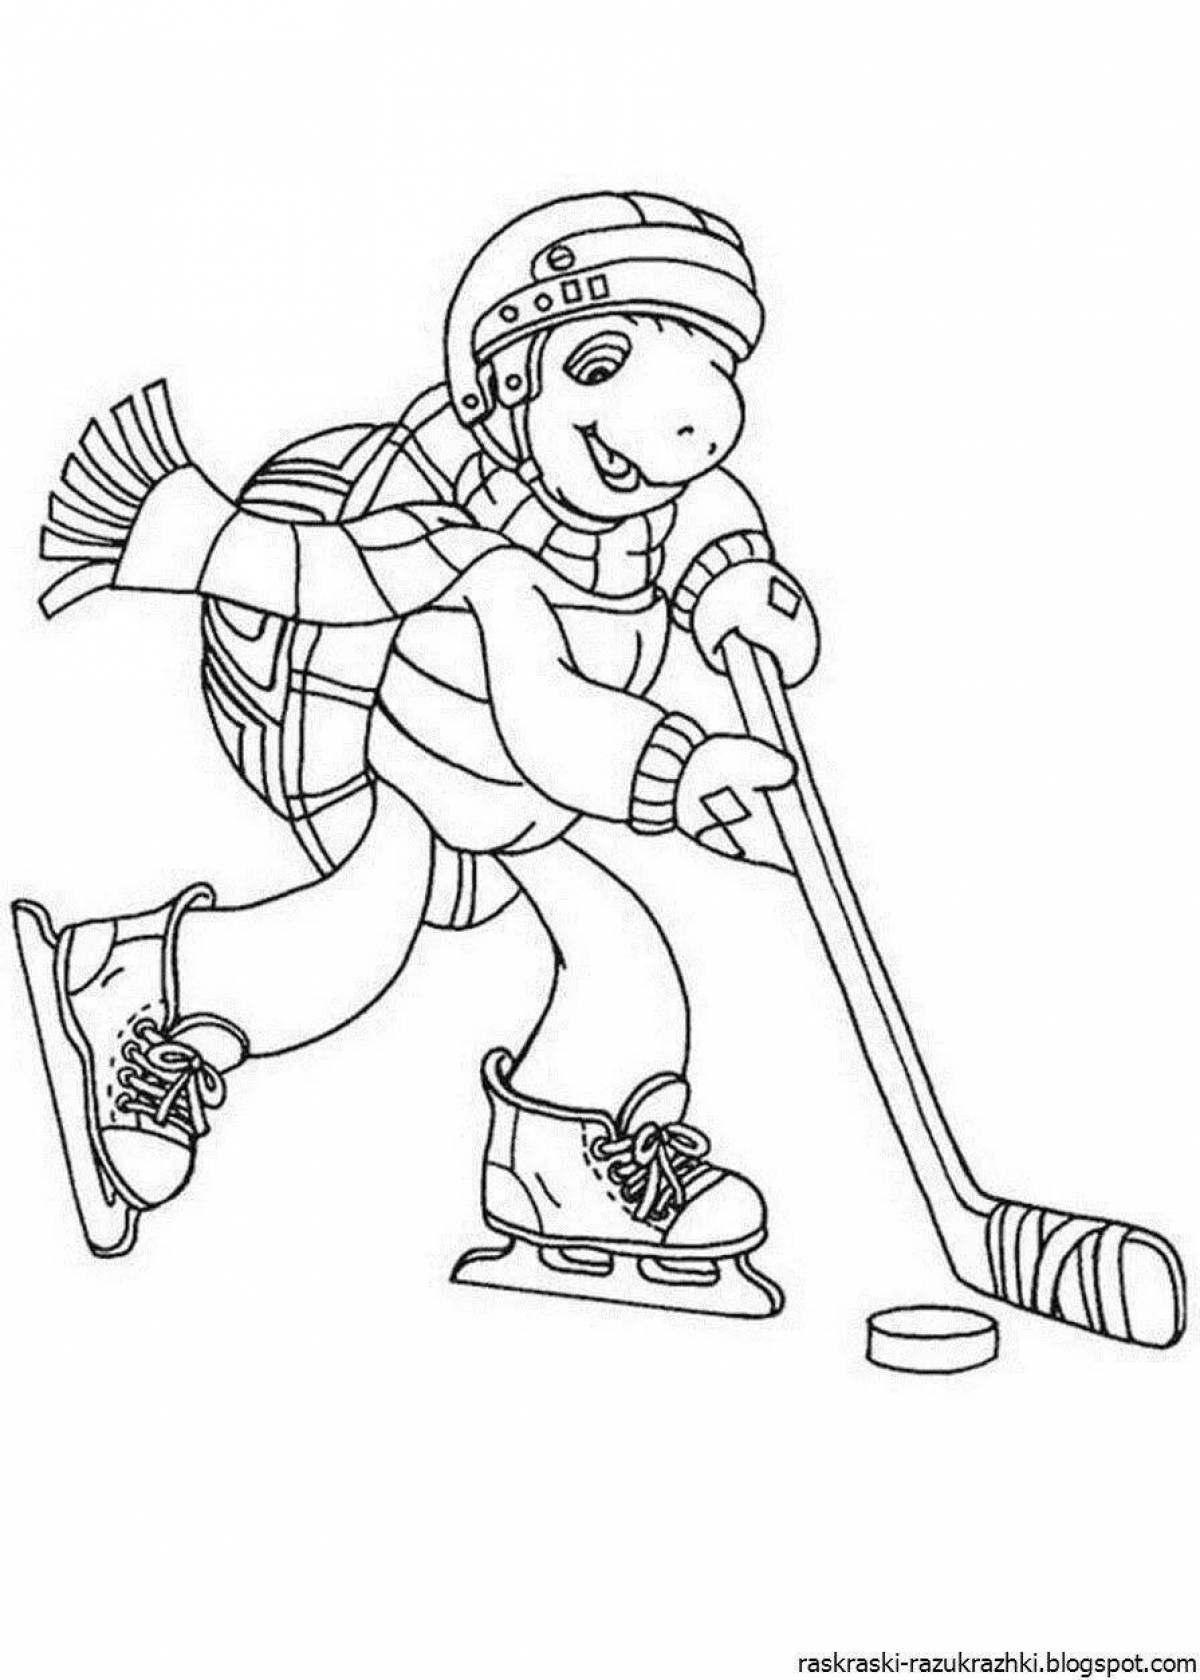 Fun winter sports coloring pages for kids